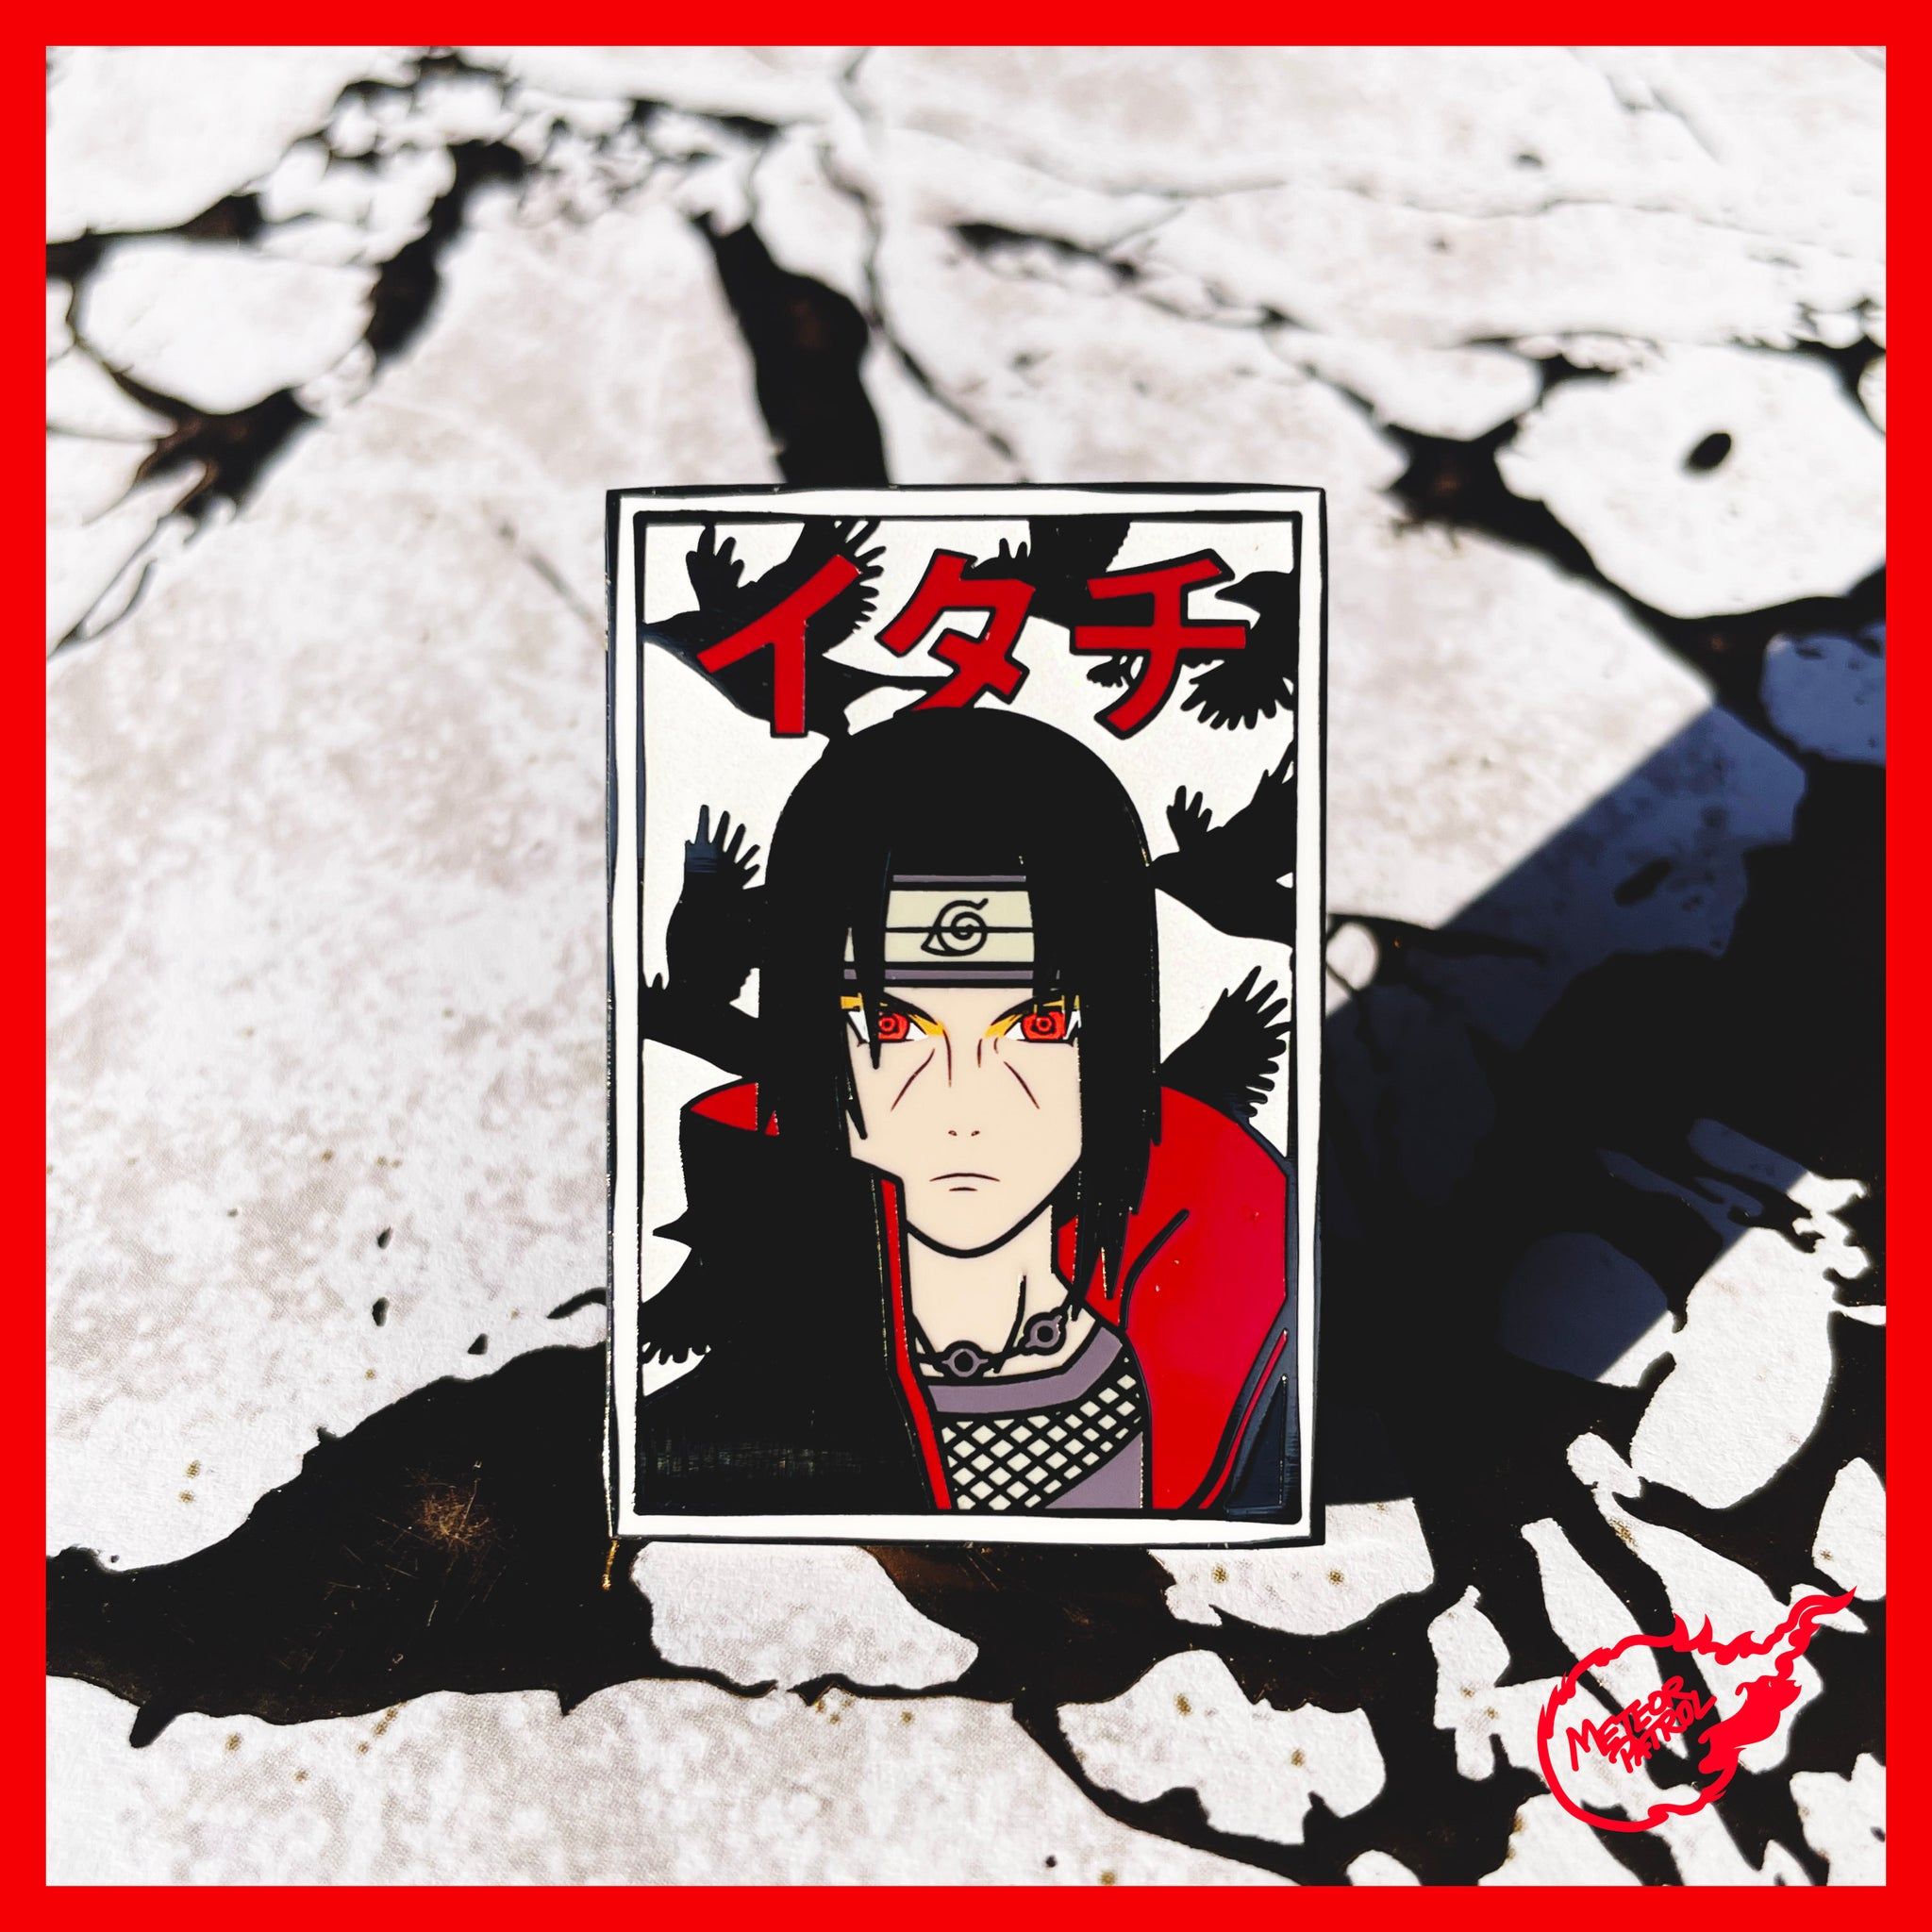 Aesthetic naruto background with Itachi and the word 